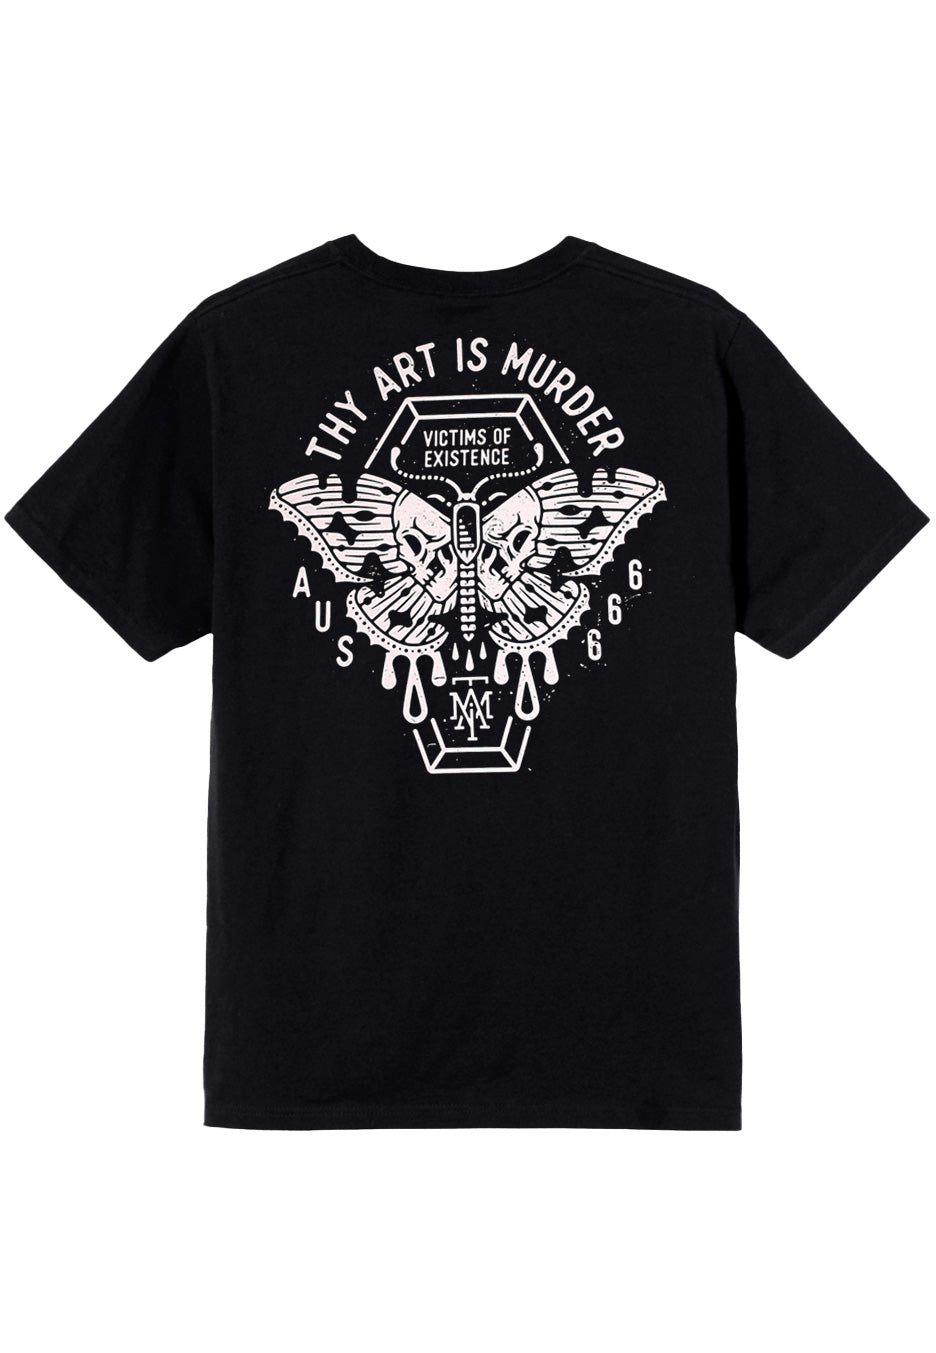 Thy Art Is Murder - Victims Of Existence - T-Shirt